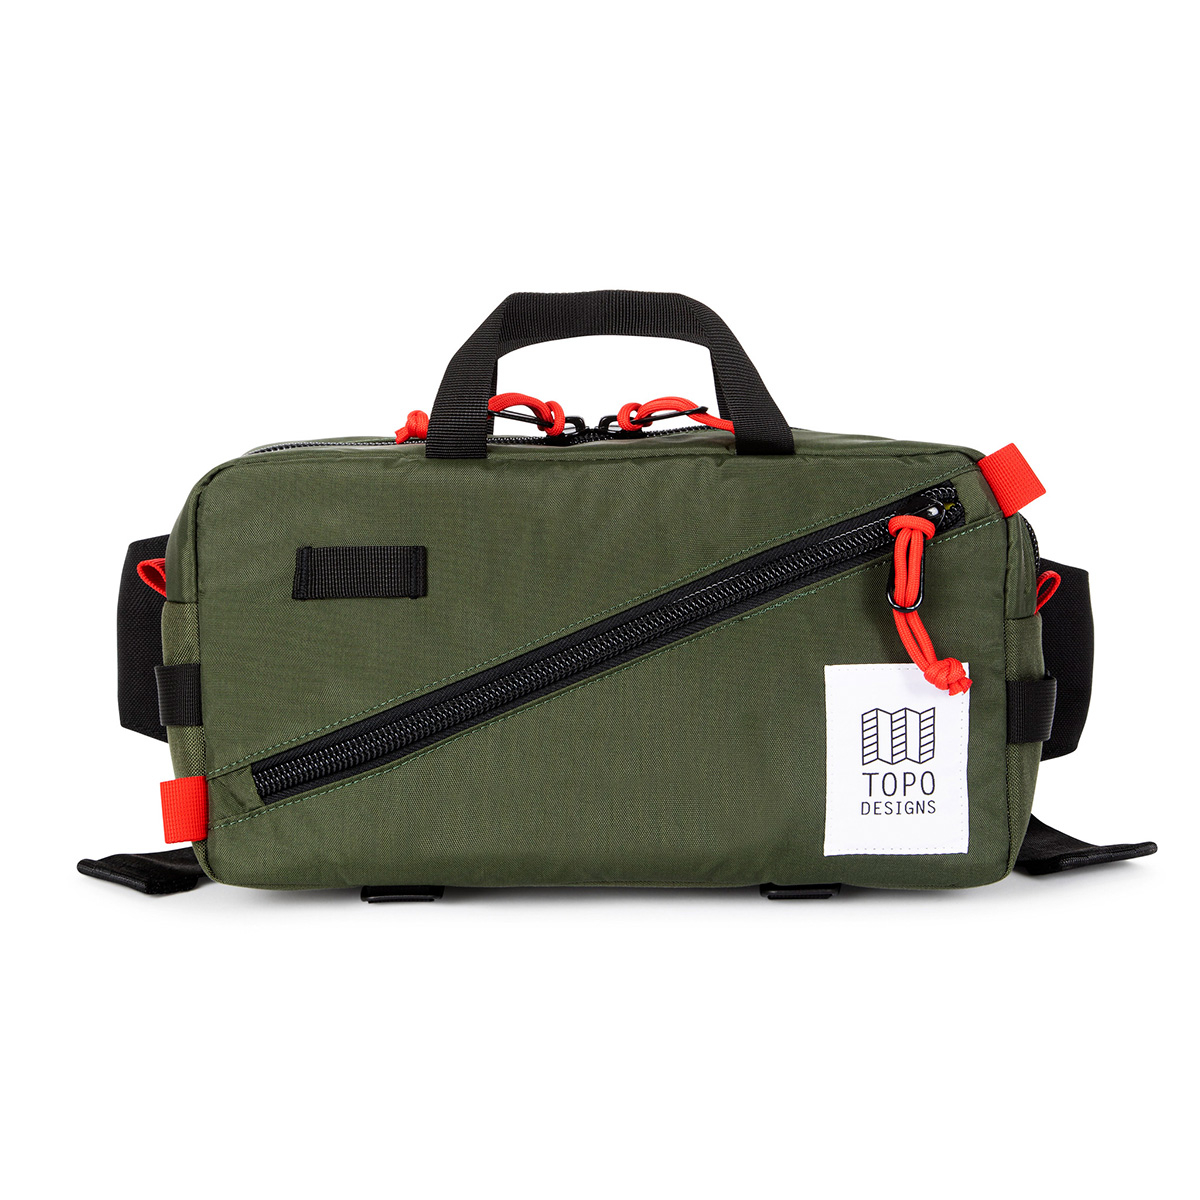 Topo Designs Quick Pack Olive, can be slung over your shoulder or worn around your waist, fanny pack style